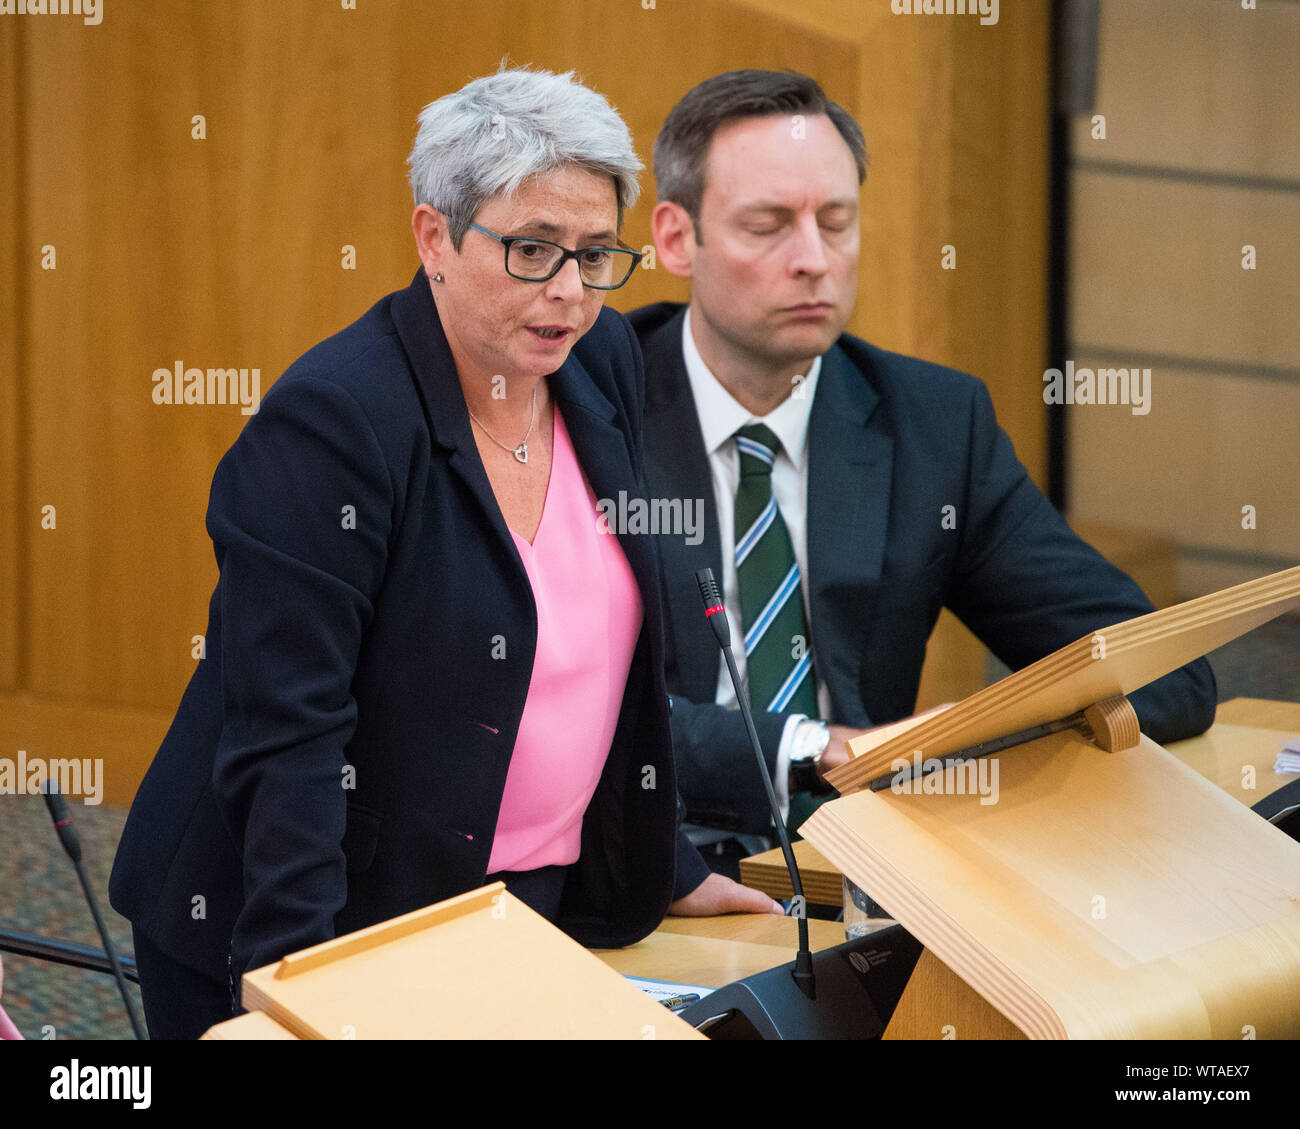 Edinburgh, UK. 5 September 2019. Pictured: (left) Annie Wells MSP - Glasgow Springburn Constituency for Mental Health Public Health and Equalities; (right) Liam Kerr MSP - Deputy Leader and Shadow Cabinet Secretary Justice. She asked the First Minister, What action the Scottish government will take oil response to the sectarian disorder in Glasgow at the weekend. Colin Fisher/CDFIMAGES.COM Stock Photo